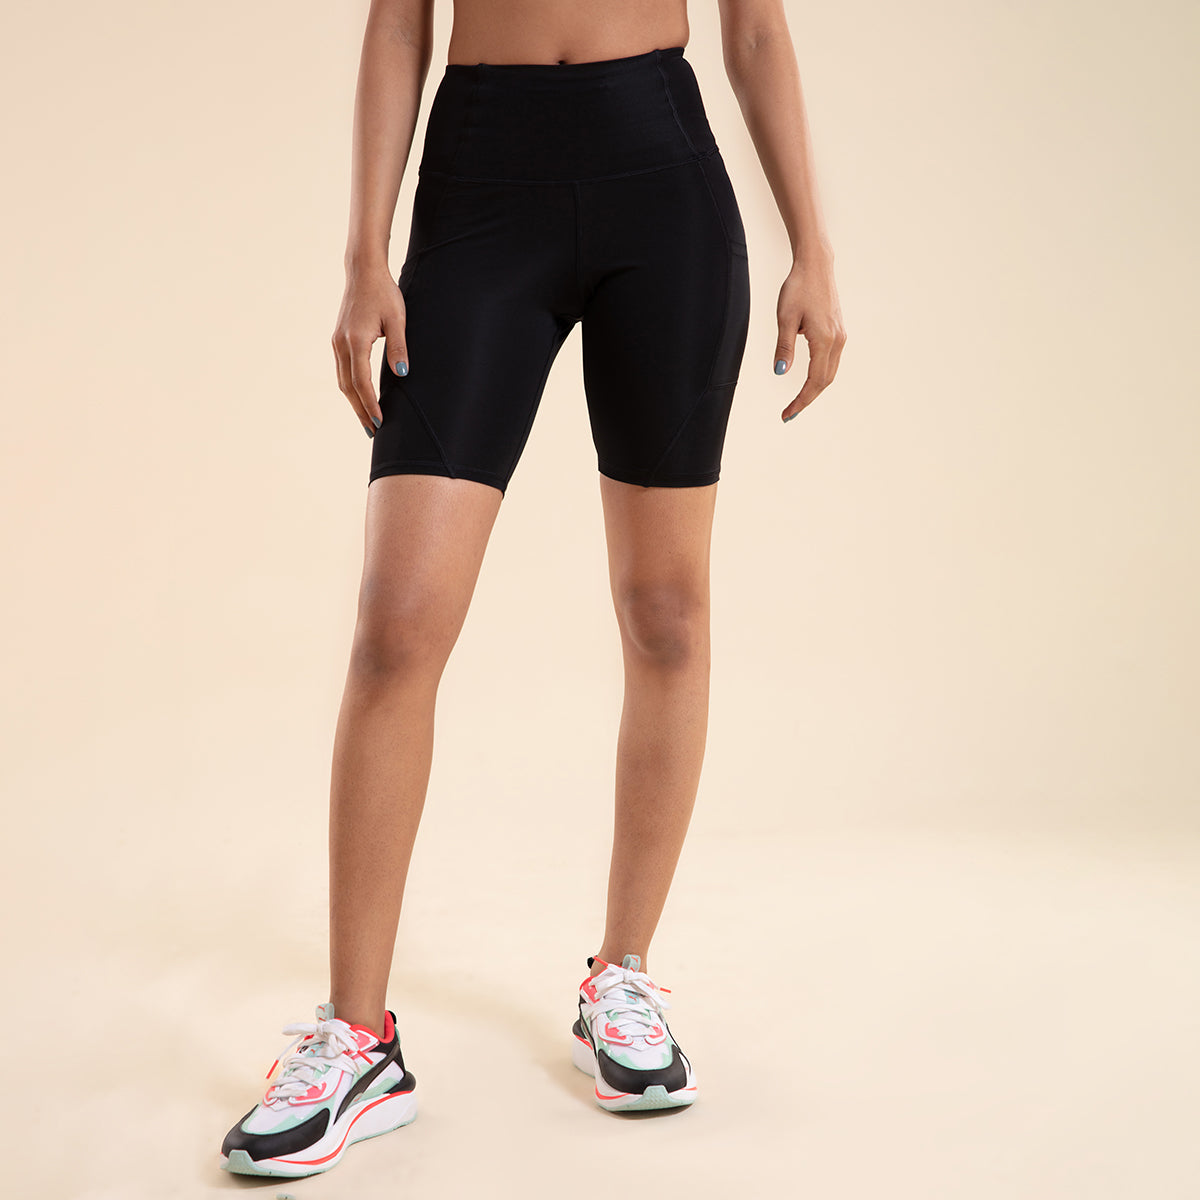 Nykd All Day High waist cycling shorts- NYK113 Anthracite